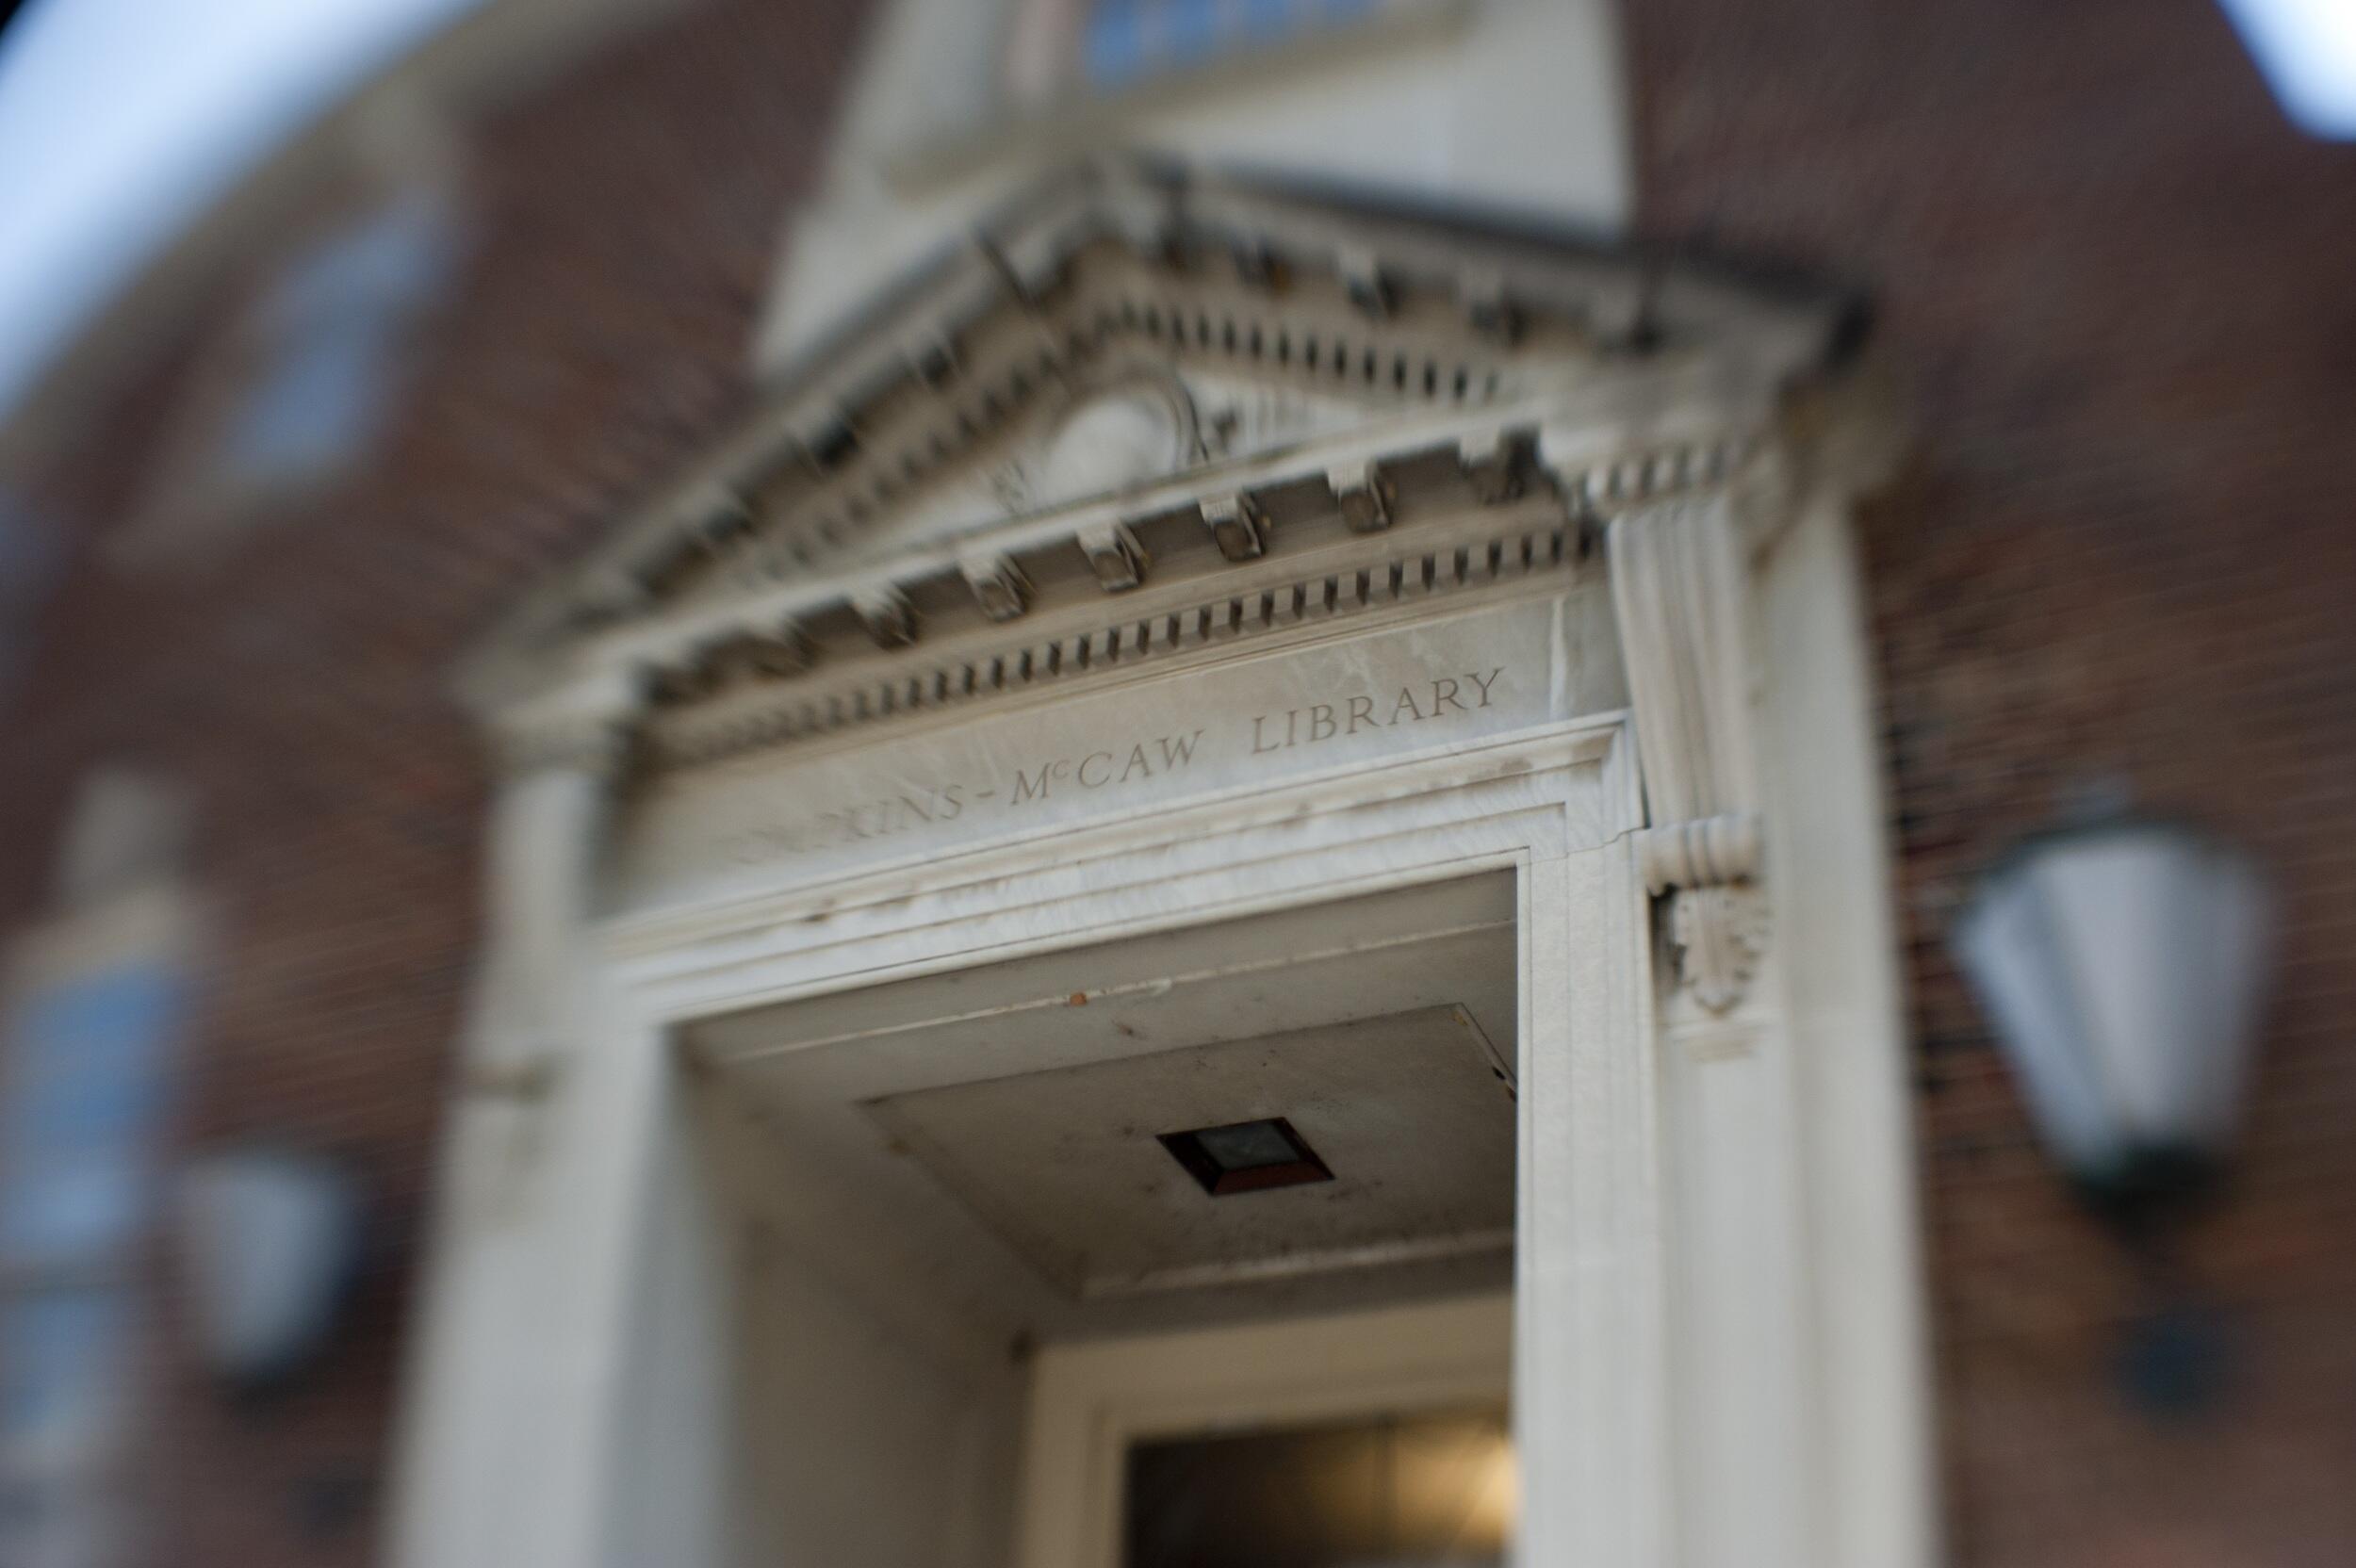 A doorway with a sign noting the Tompkins-McCaw Library on the M C V campus of V C U.